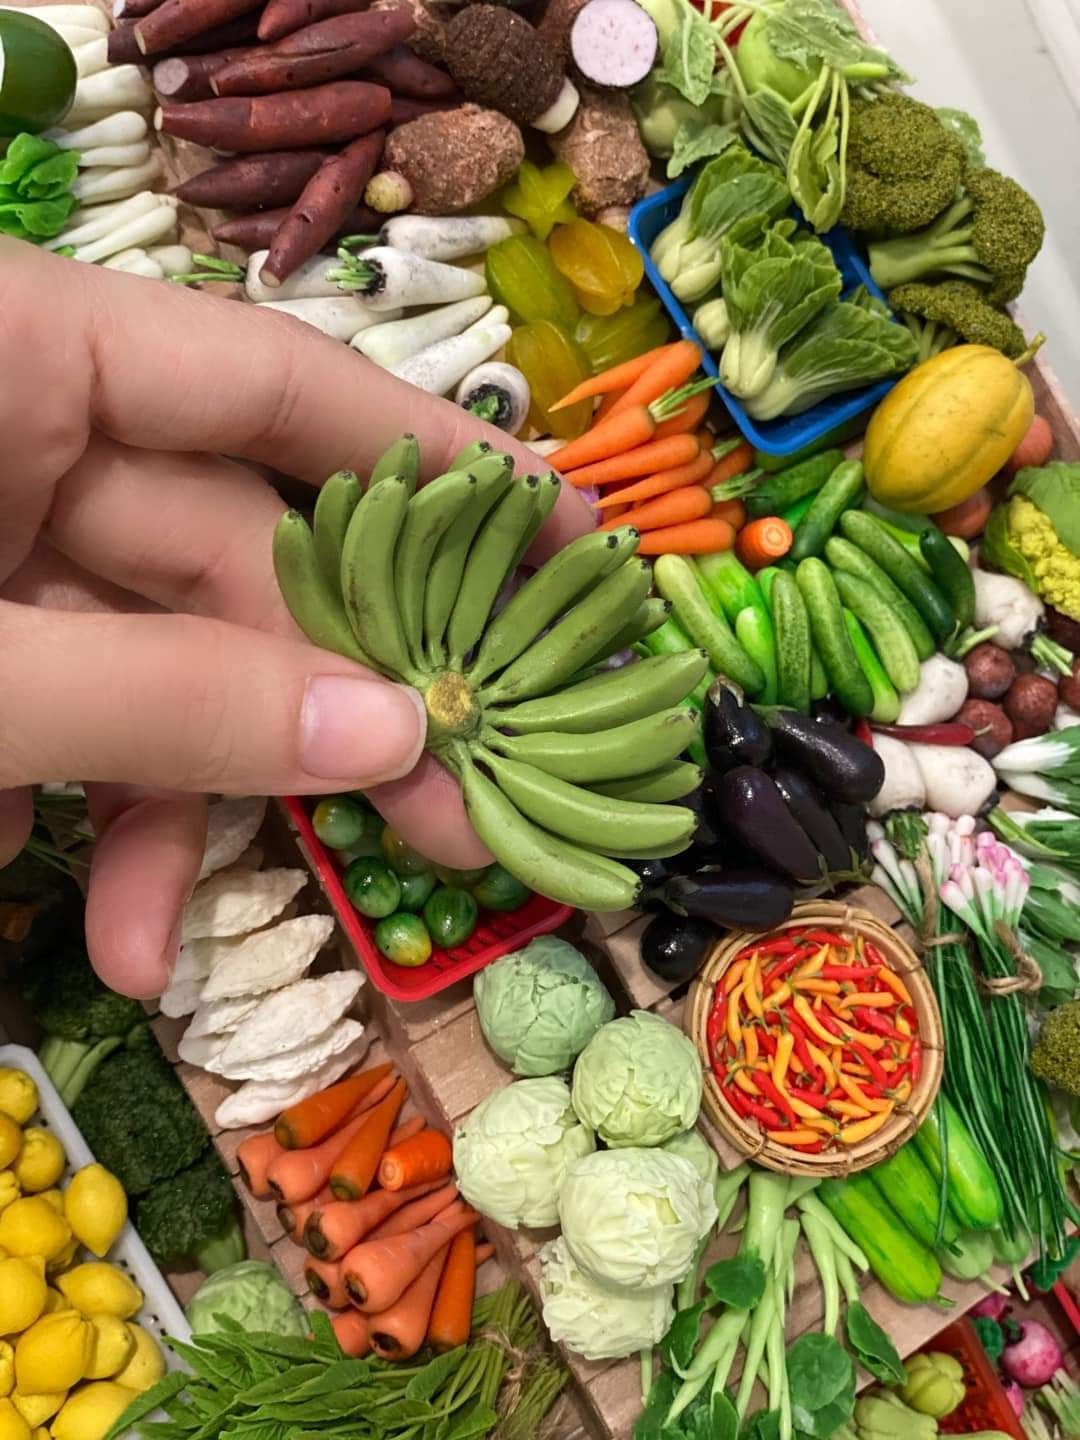 The ingredients to make this models are diverse. It took a lot of time for Nhu Quynh to find all the ingredients, and had to wait about 1-2 weeks for them to arrive.  Photo: Facebook 